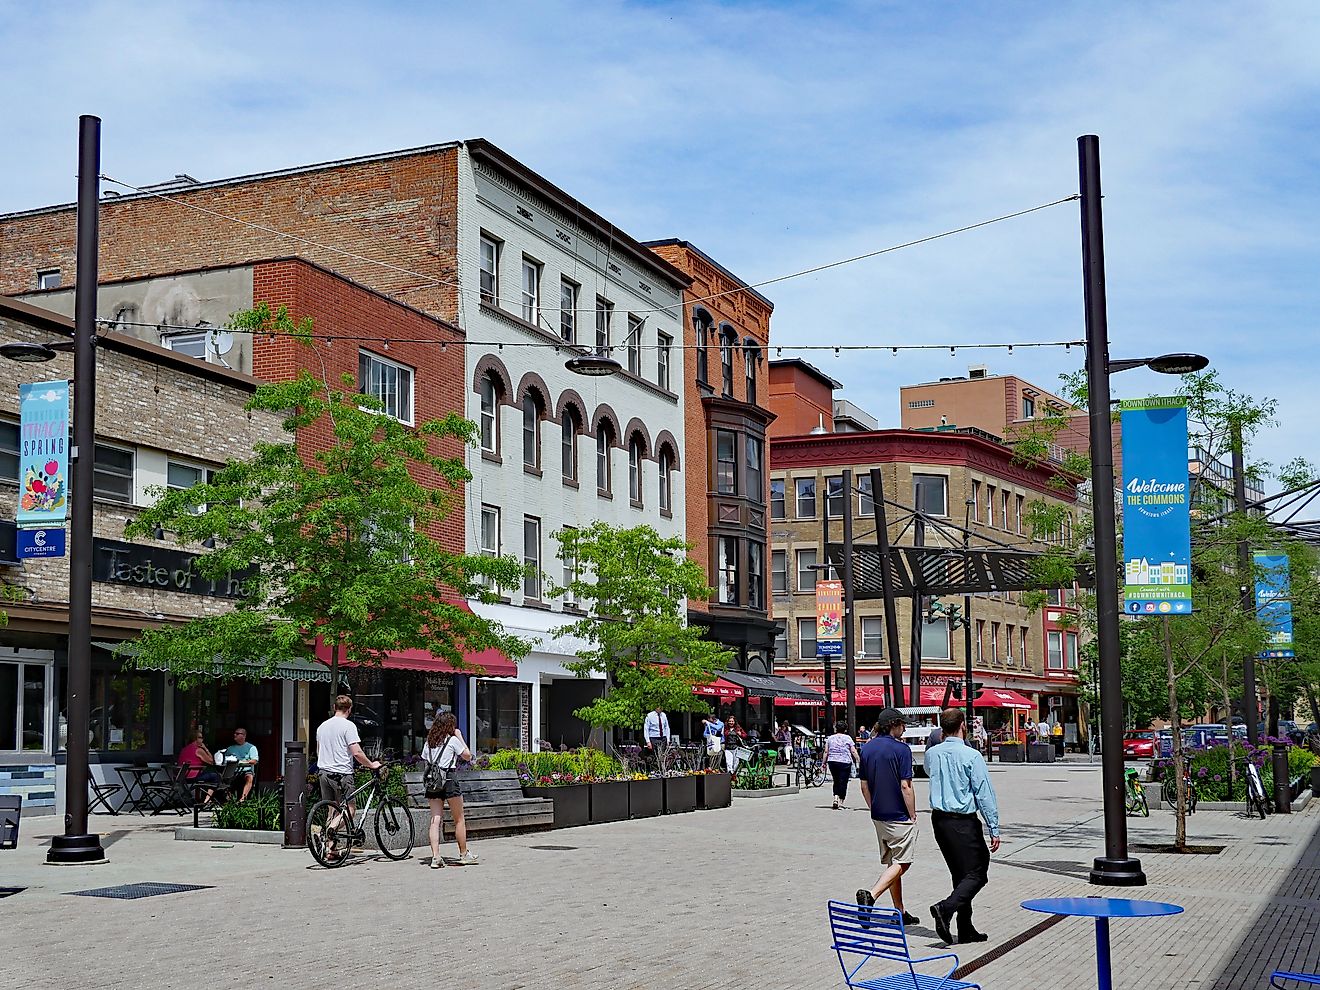 Ithaca, New York, the home of Cornell University, has a lively downtown with shopping and restaurants, via Spiroview Inc / Shutterstock.com